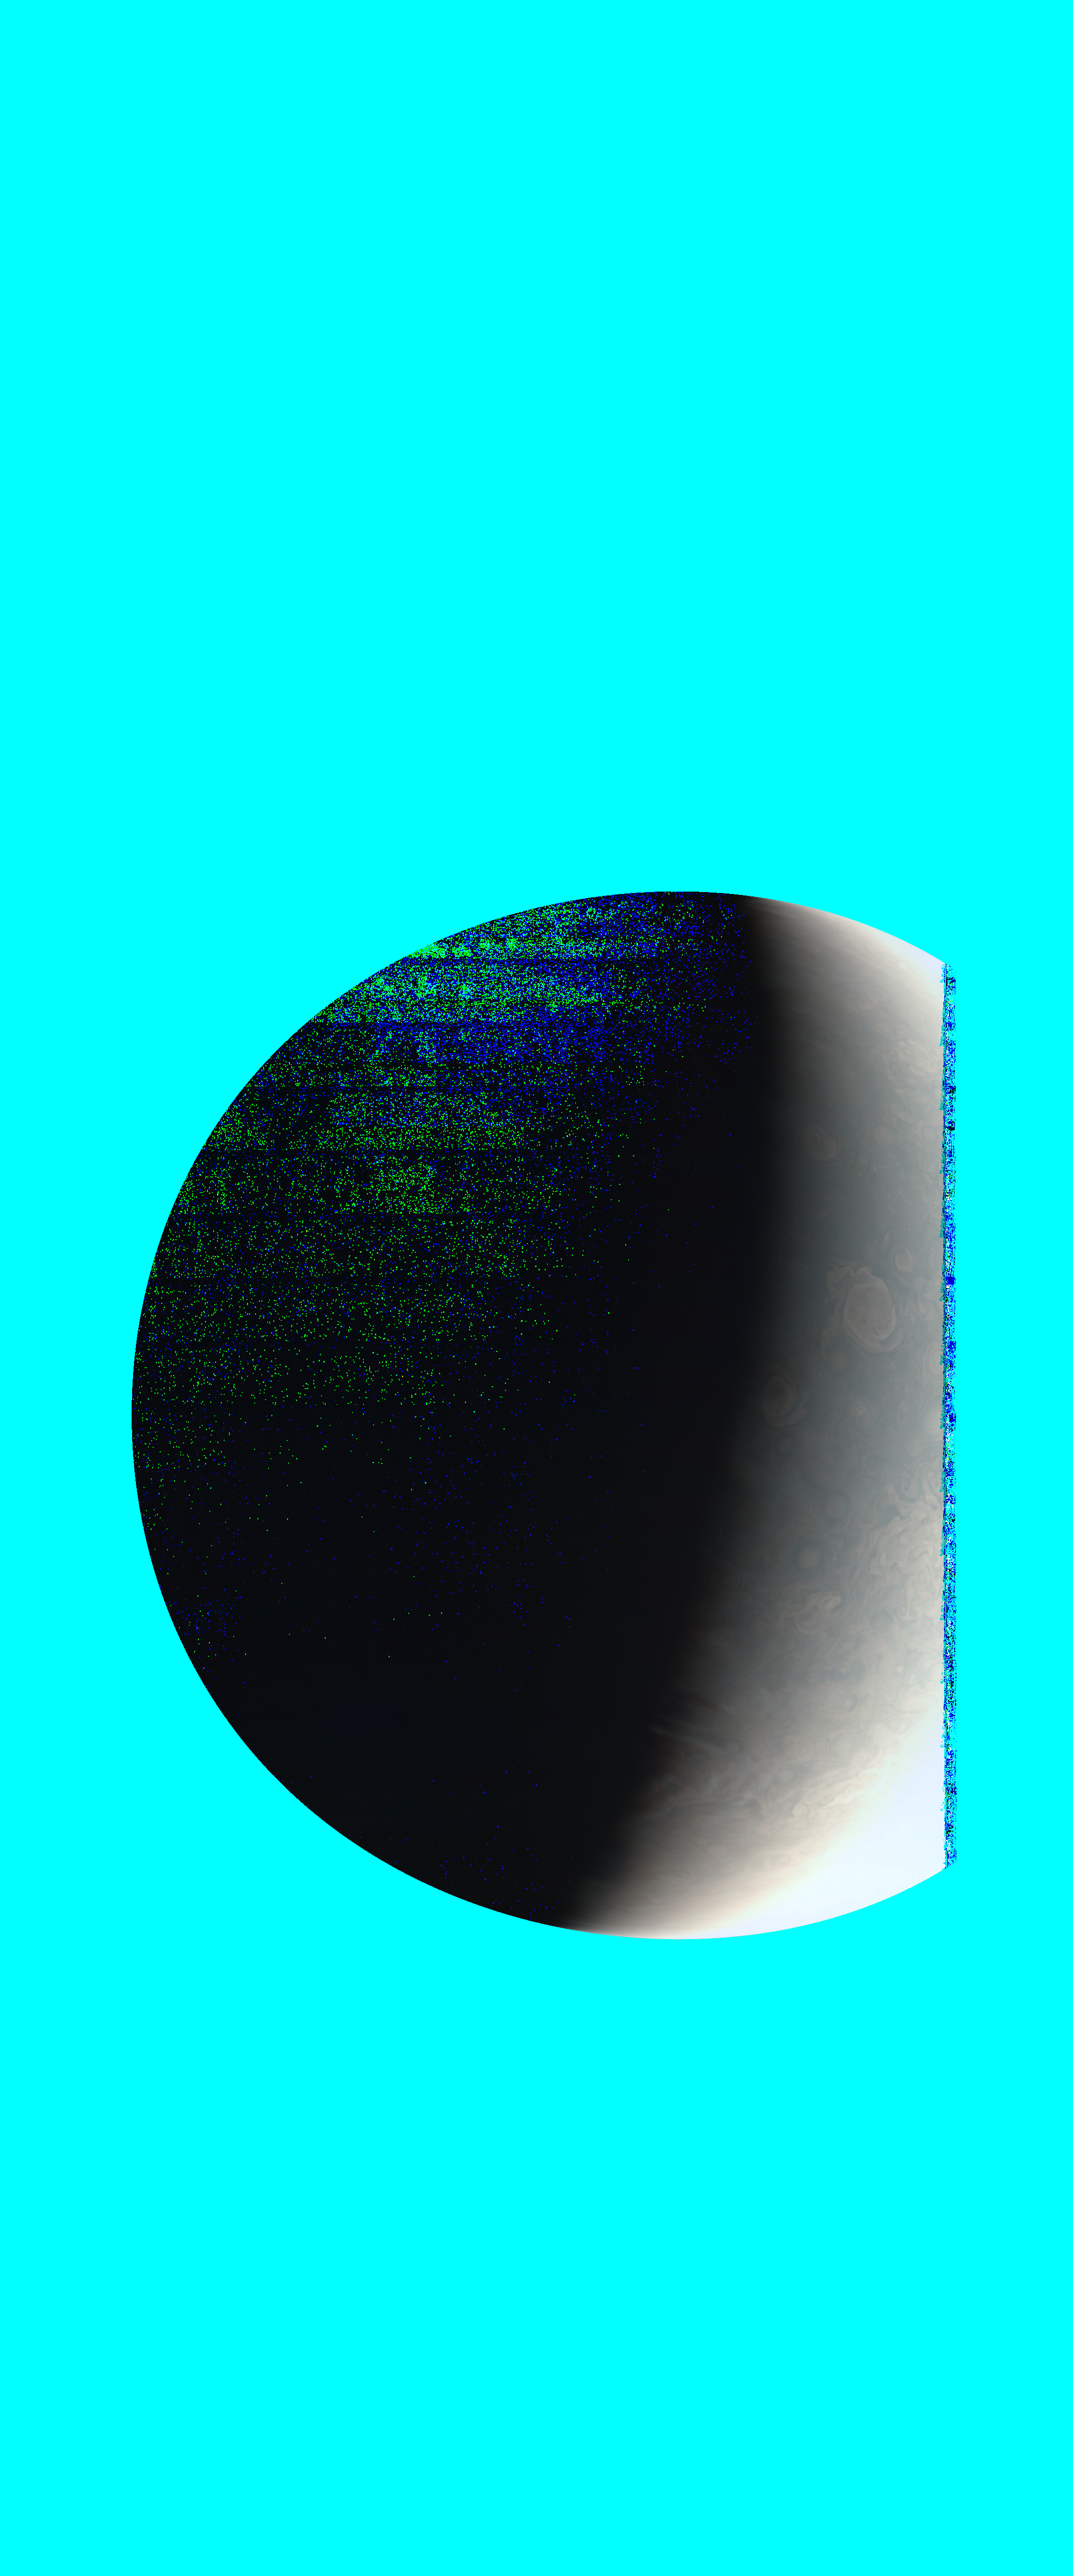 JNCE_2019255_22C00008_V01-raw.bmp_mask_30px_30.065000s_cx814.0_000000_decompanded.bmp_sphC_.png